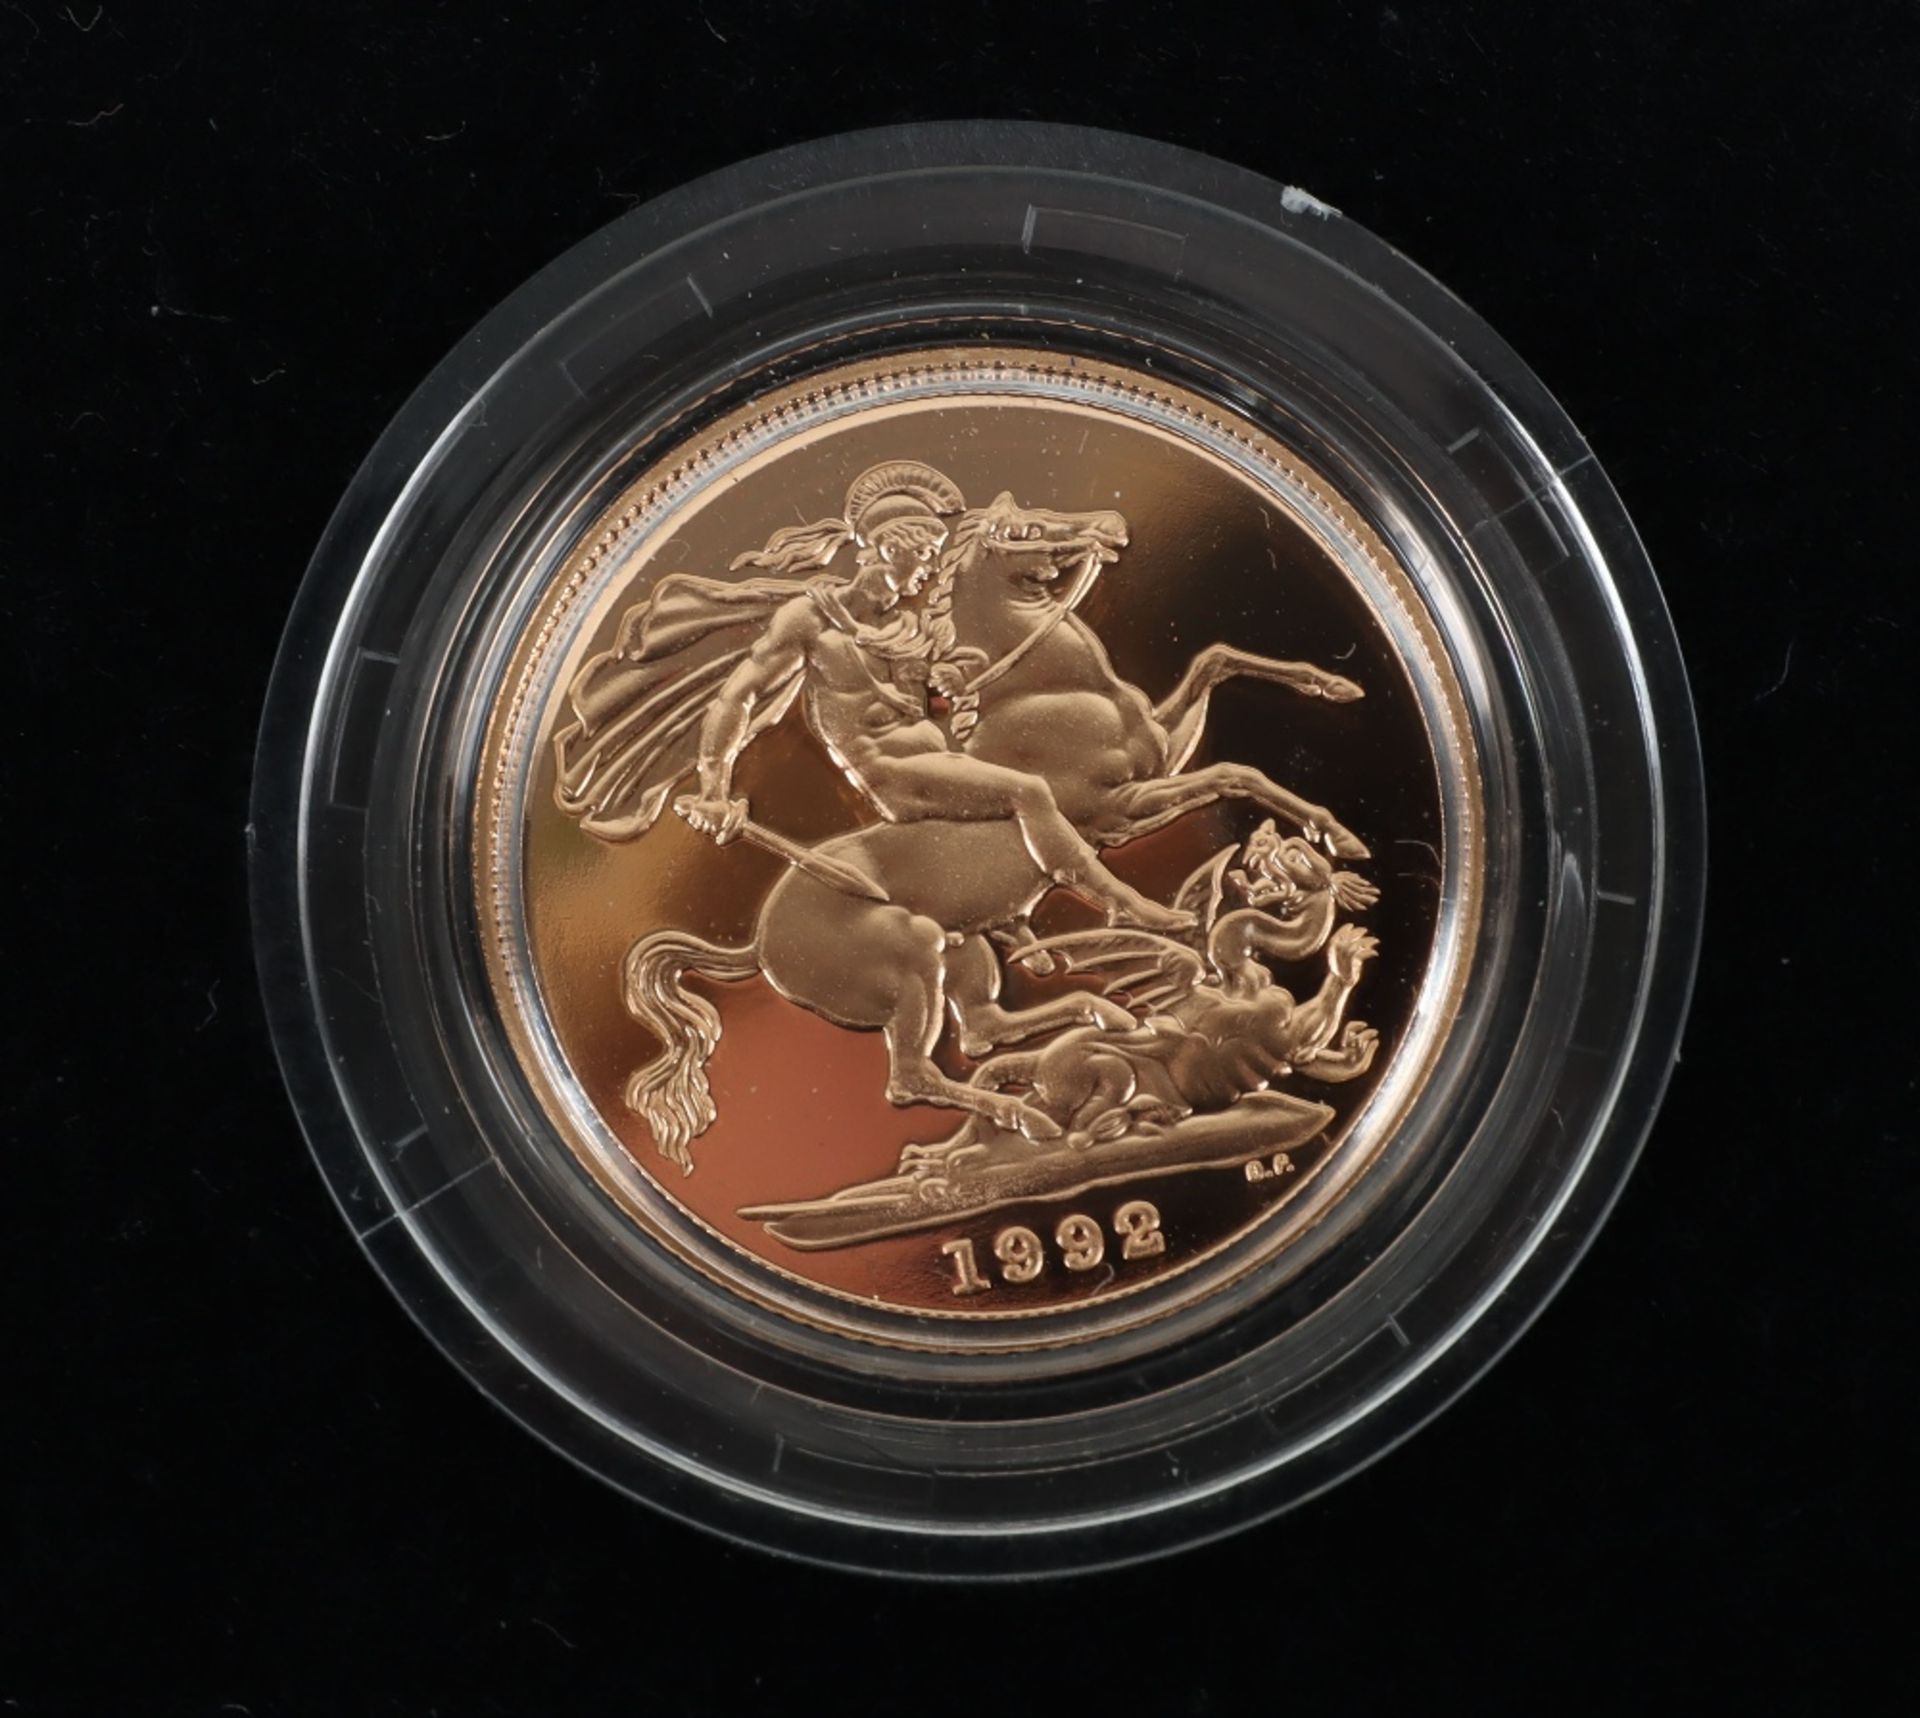 1992 Proof Sovereign - Image 3 of 3